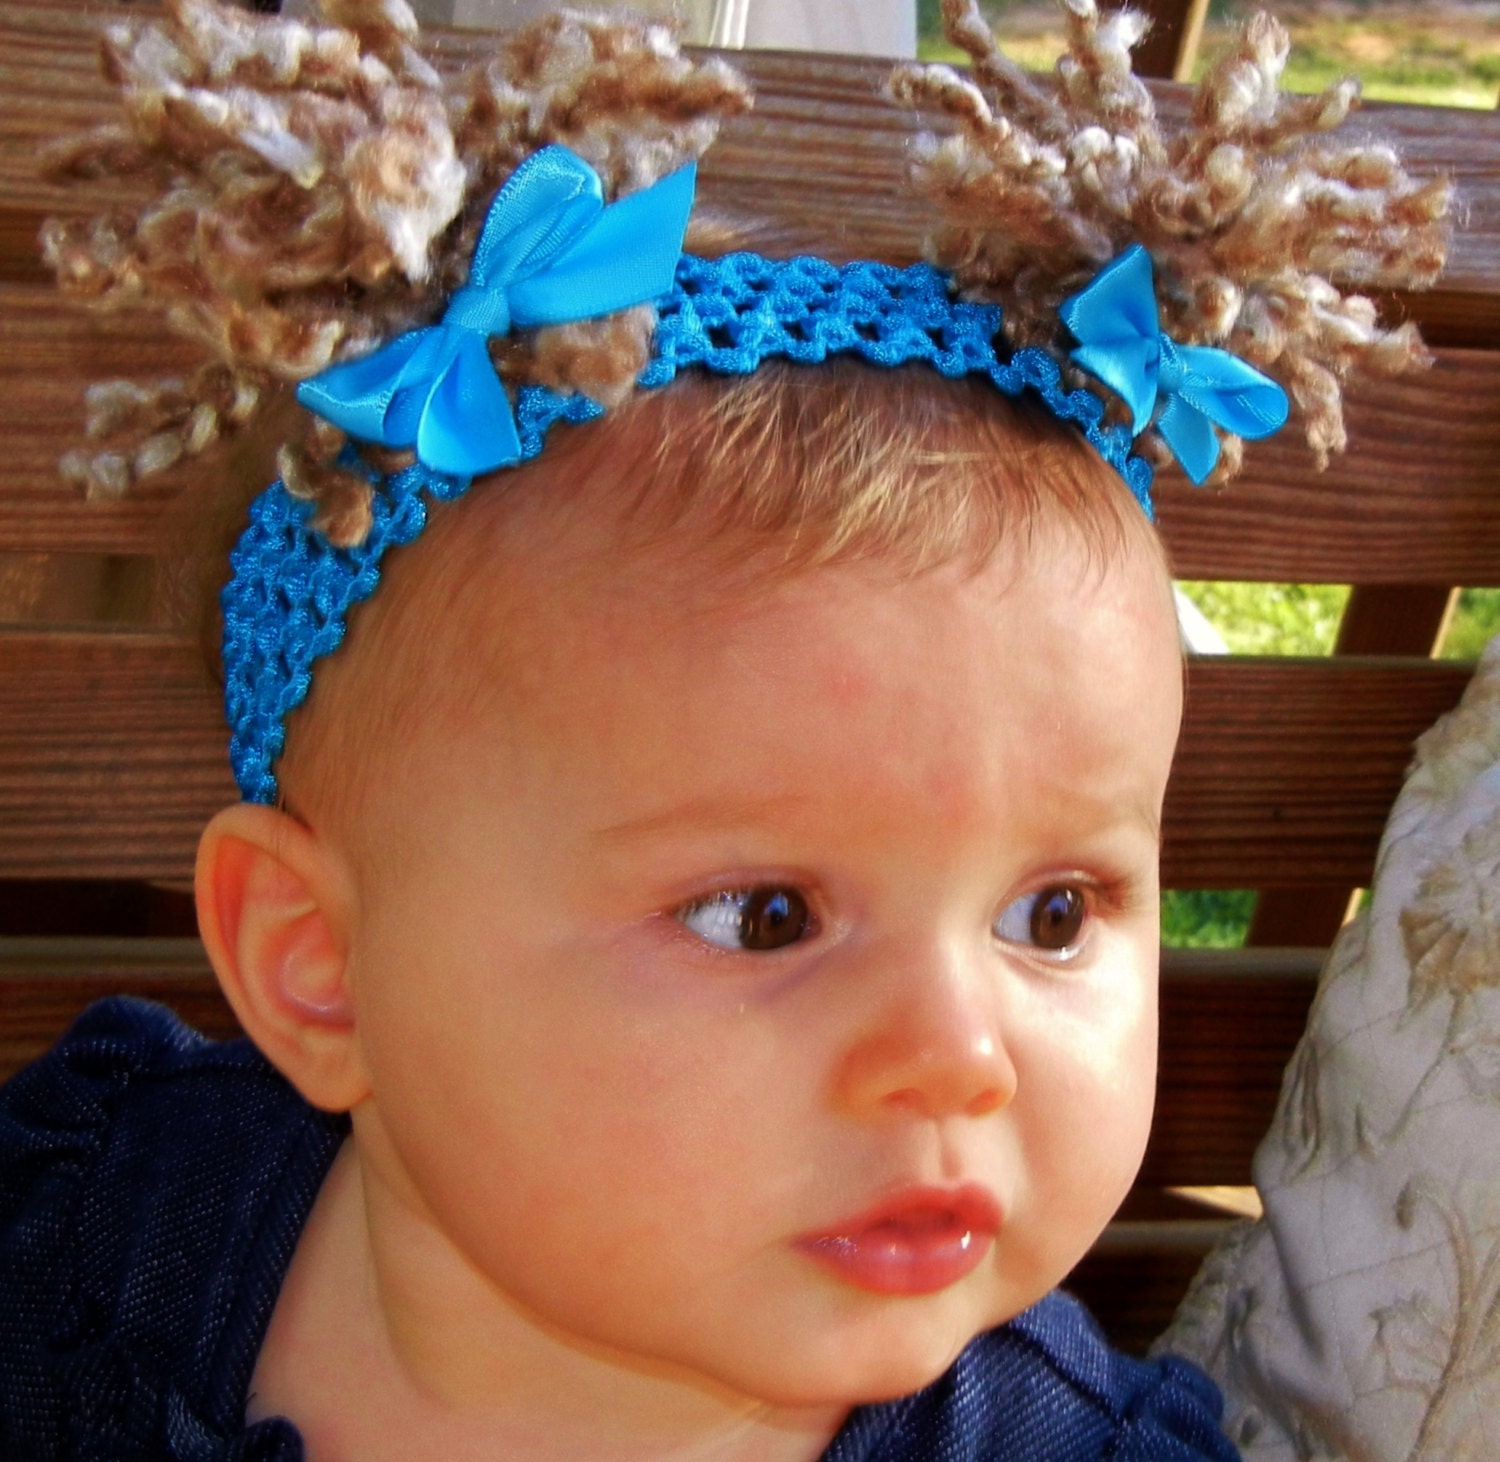 616 New baby headband with pigtails 424 Chandeliers & Pendant Lights 